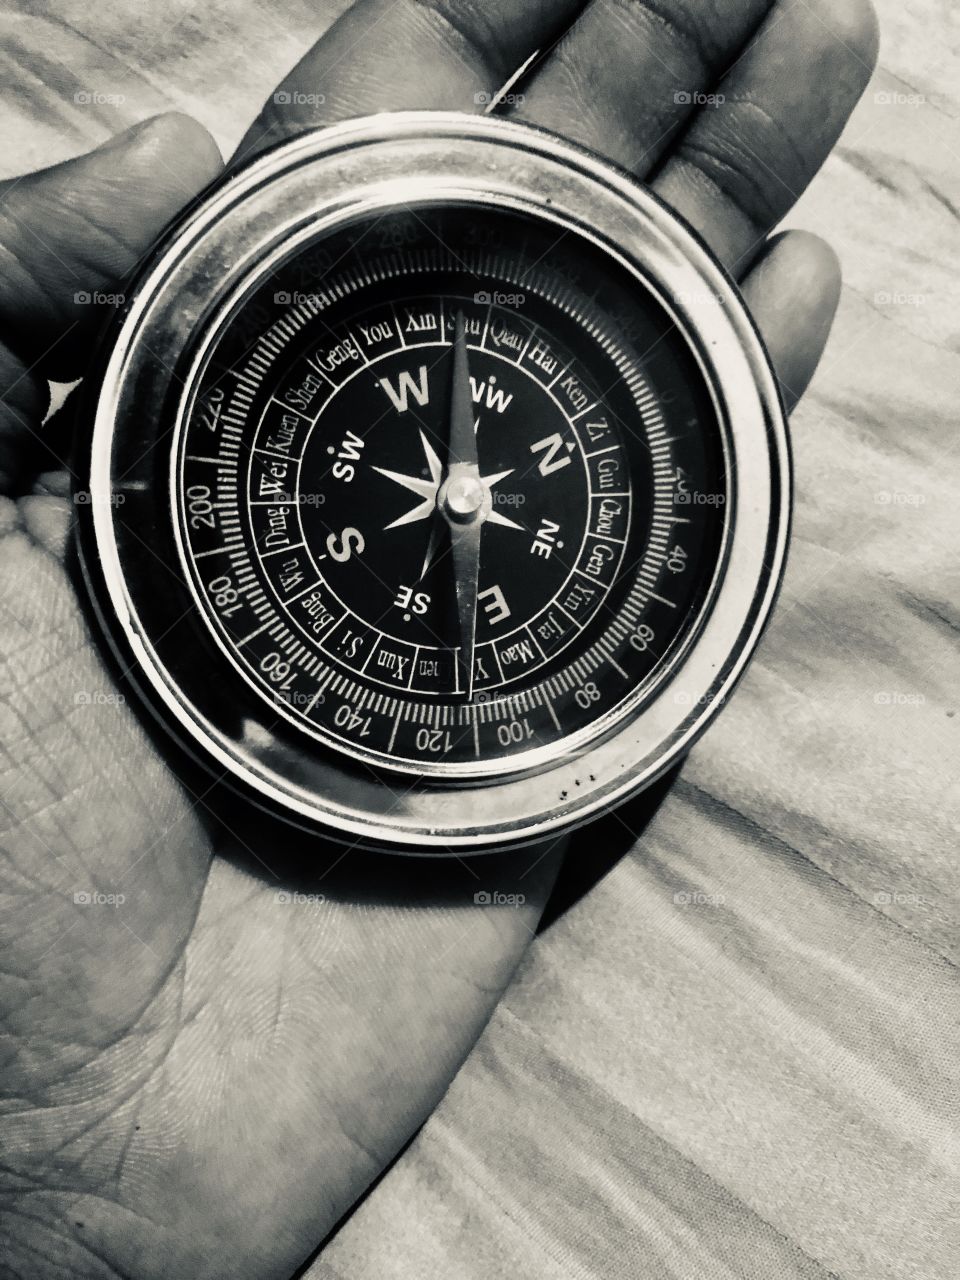 Compass | The hand compass | i’m using it like a instrument for my daily works. I love it and it’s helpful thing to me a lot. Picture location is Sri Lanka. 